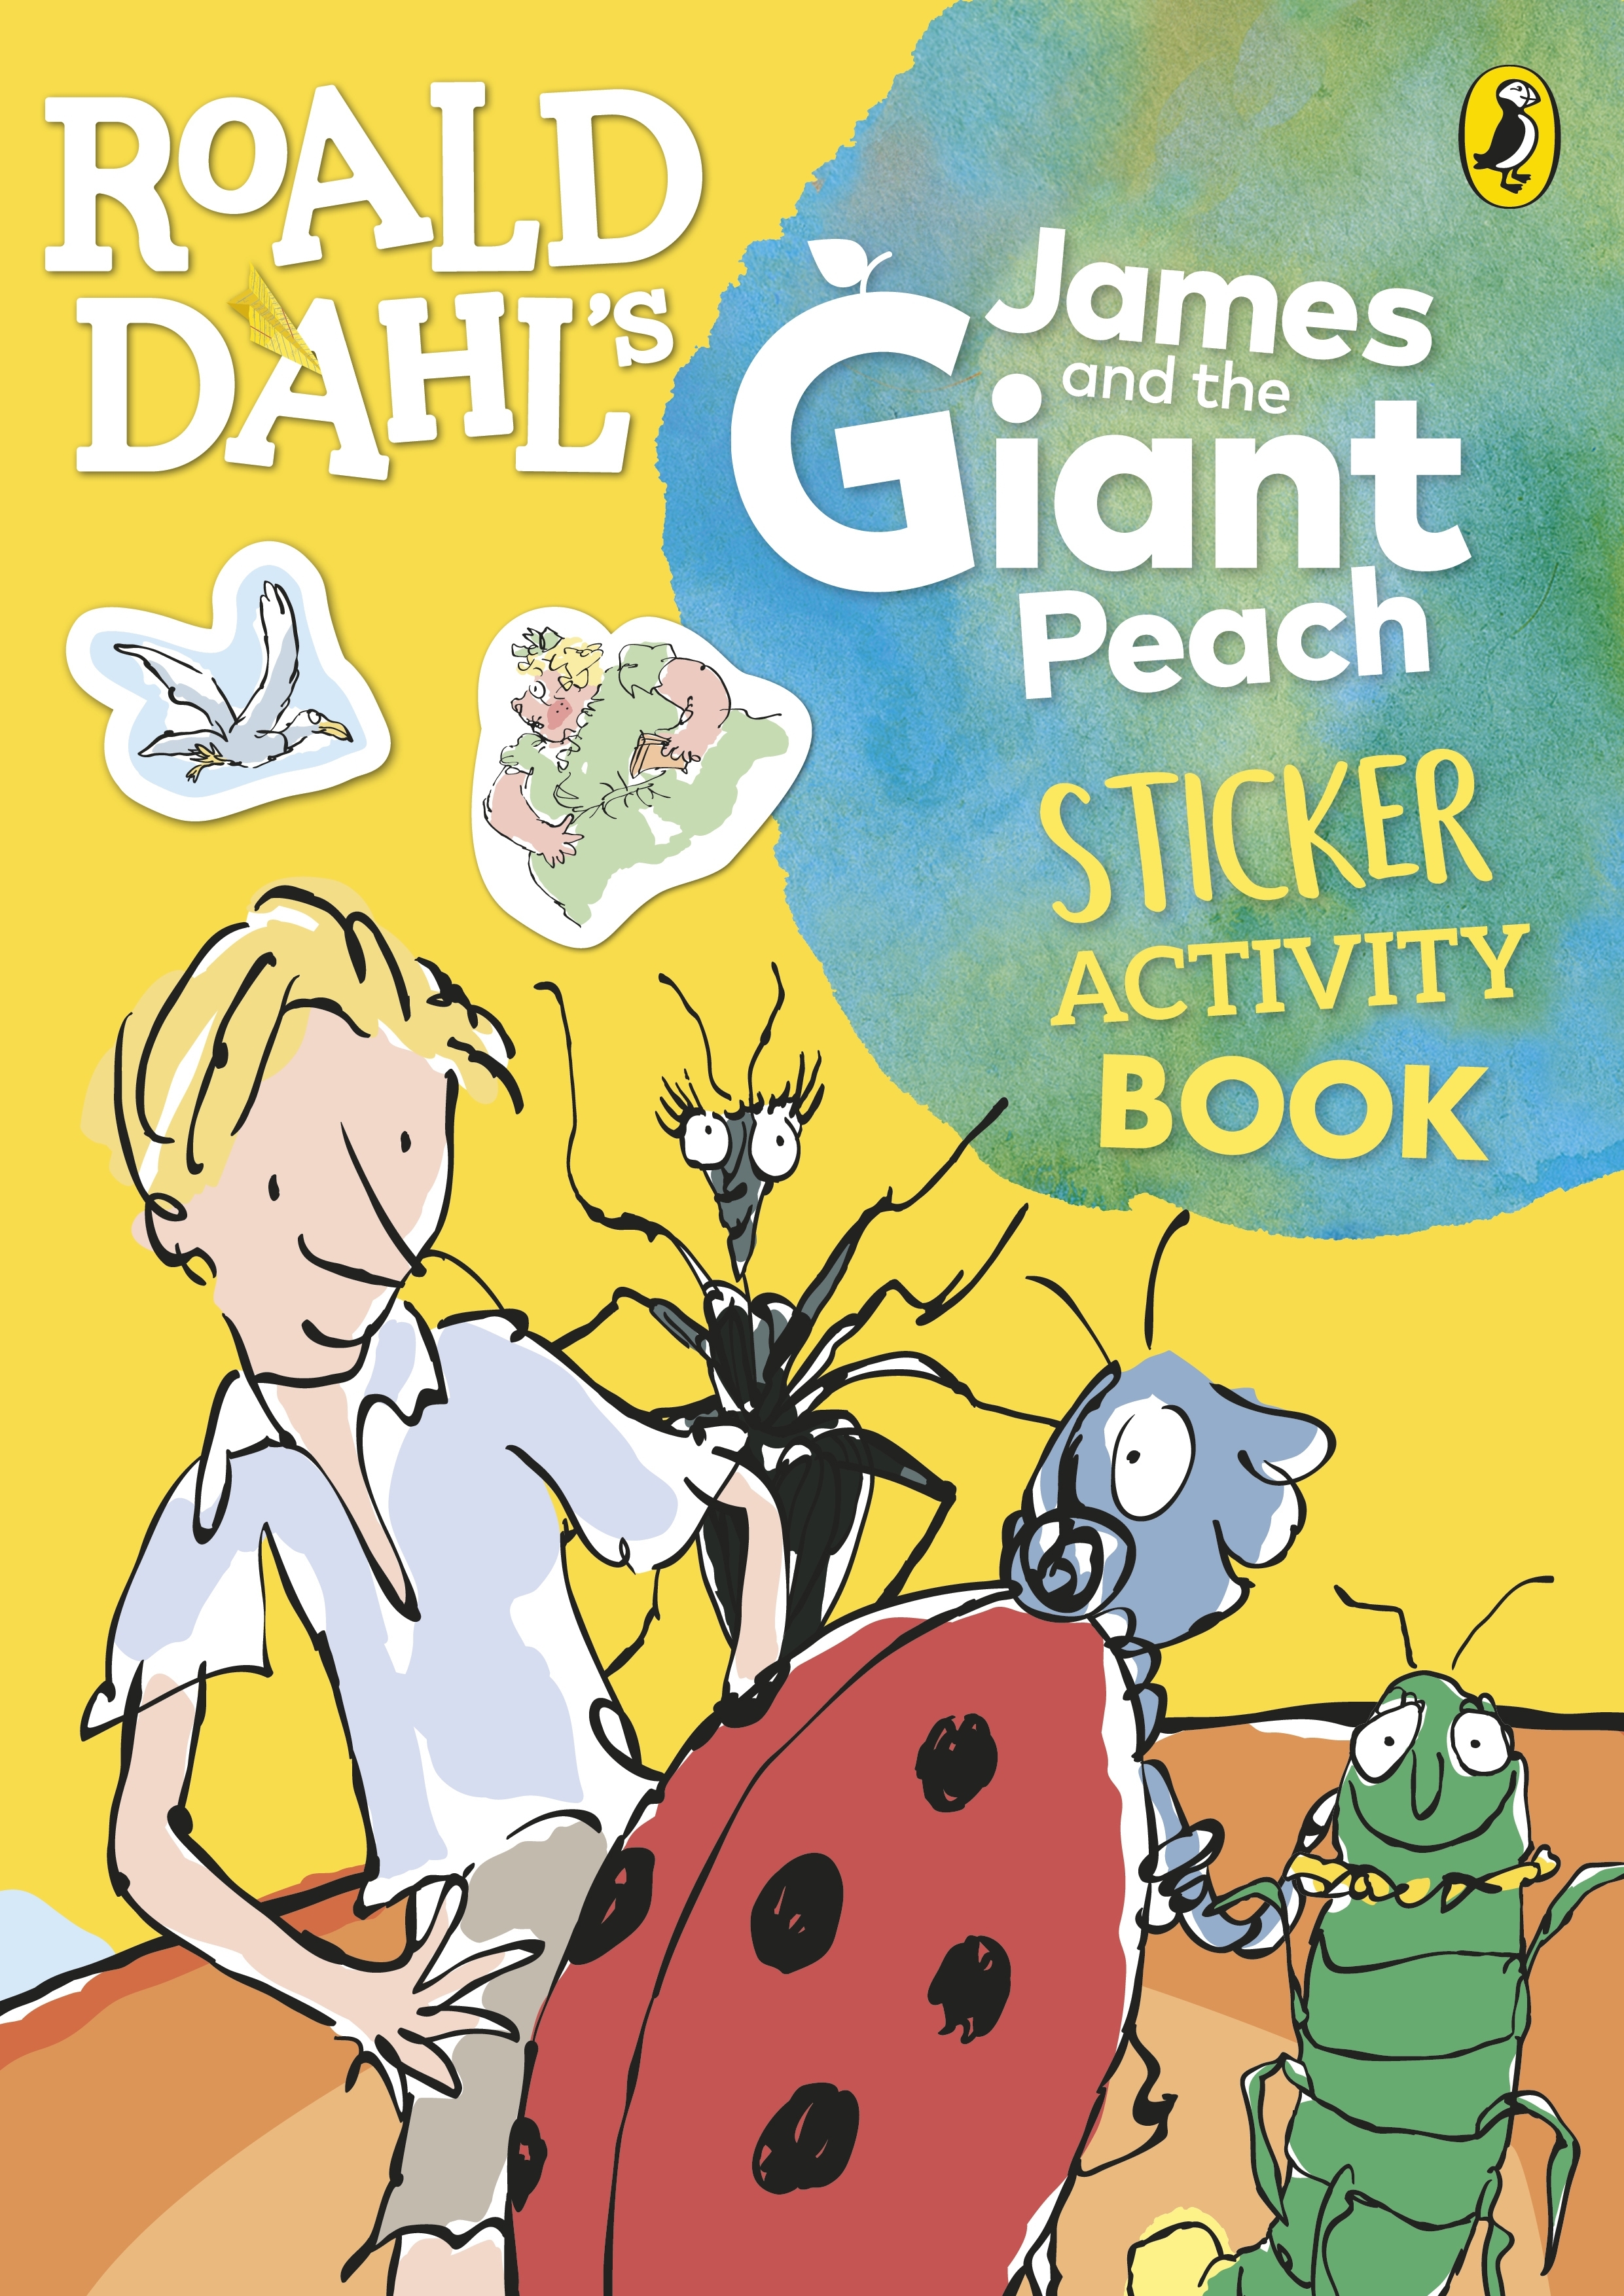 book review james and the giant peach